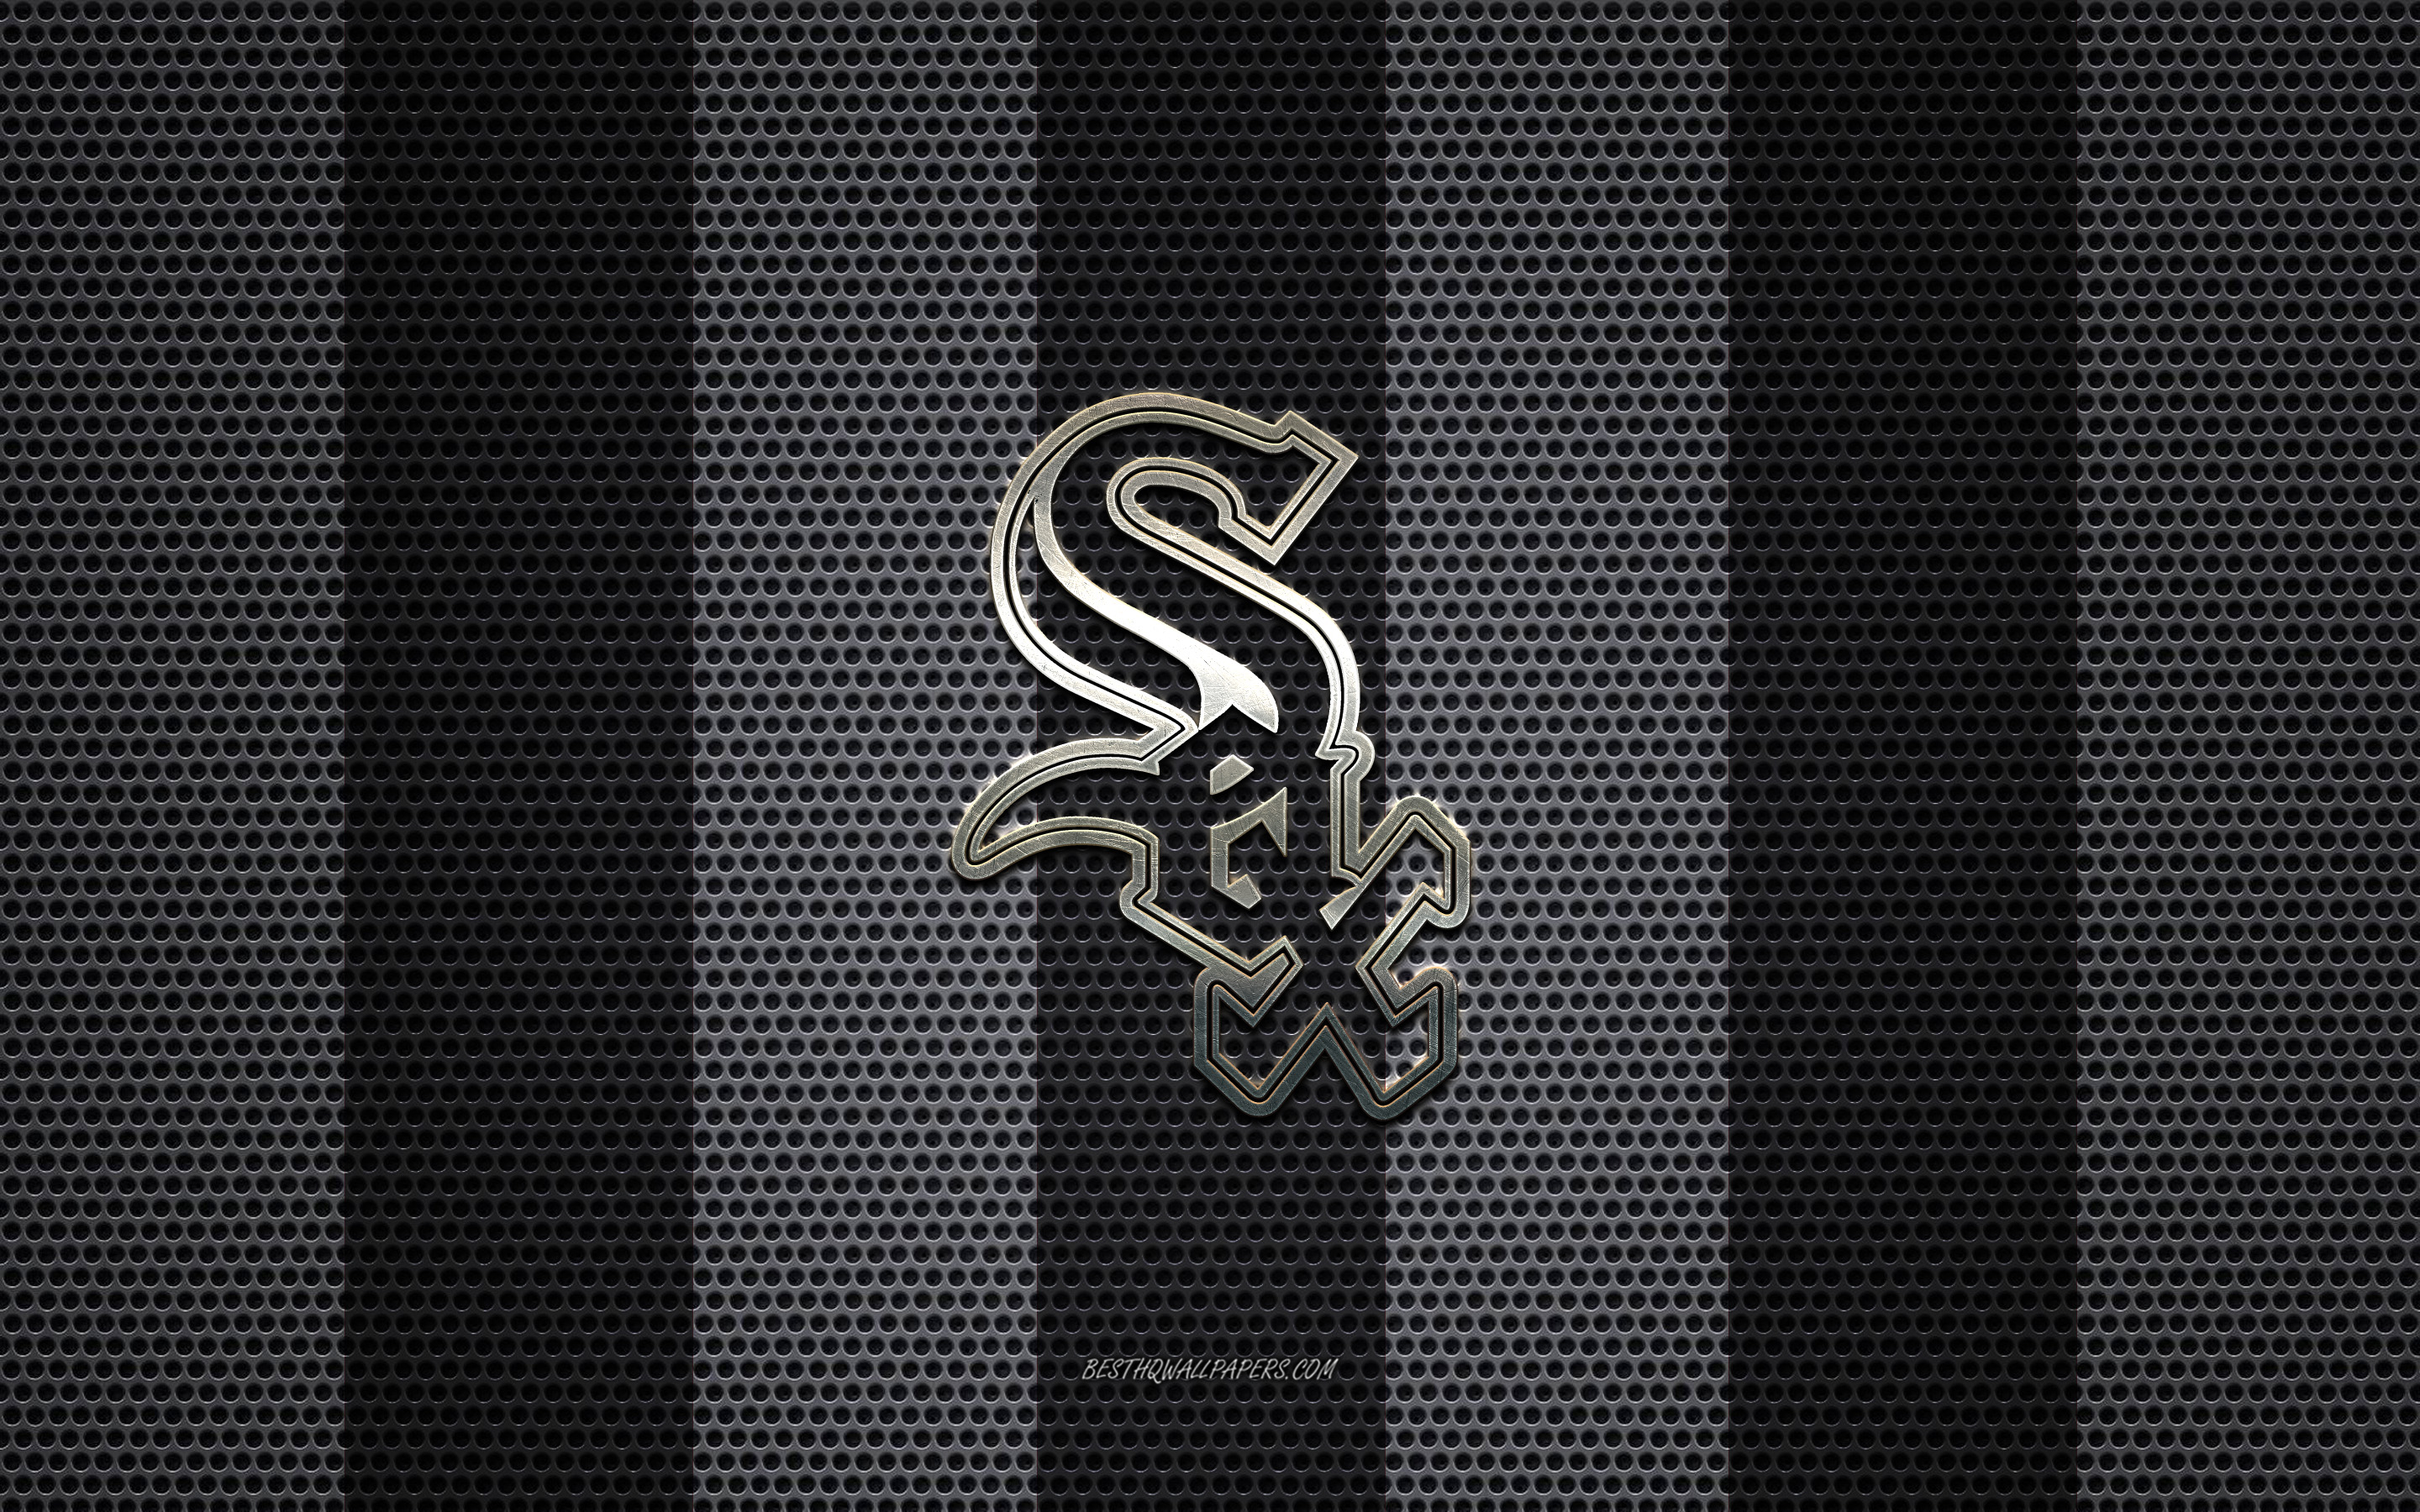 Download wallpaper Chicago White Sox logo, American baseball club, metal emblem, black and white metal mesh background, Chicago White Sox, MLB, Chicago, Illinois, USA, baseball for desktop with resolution 2880x1800. High Quality